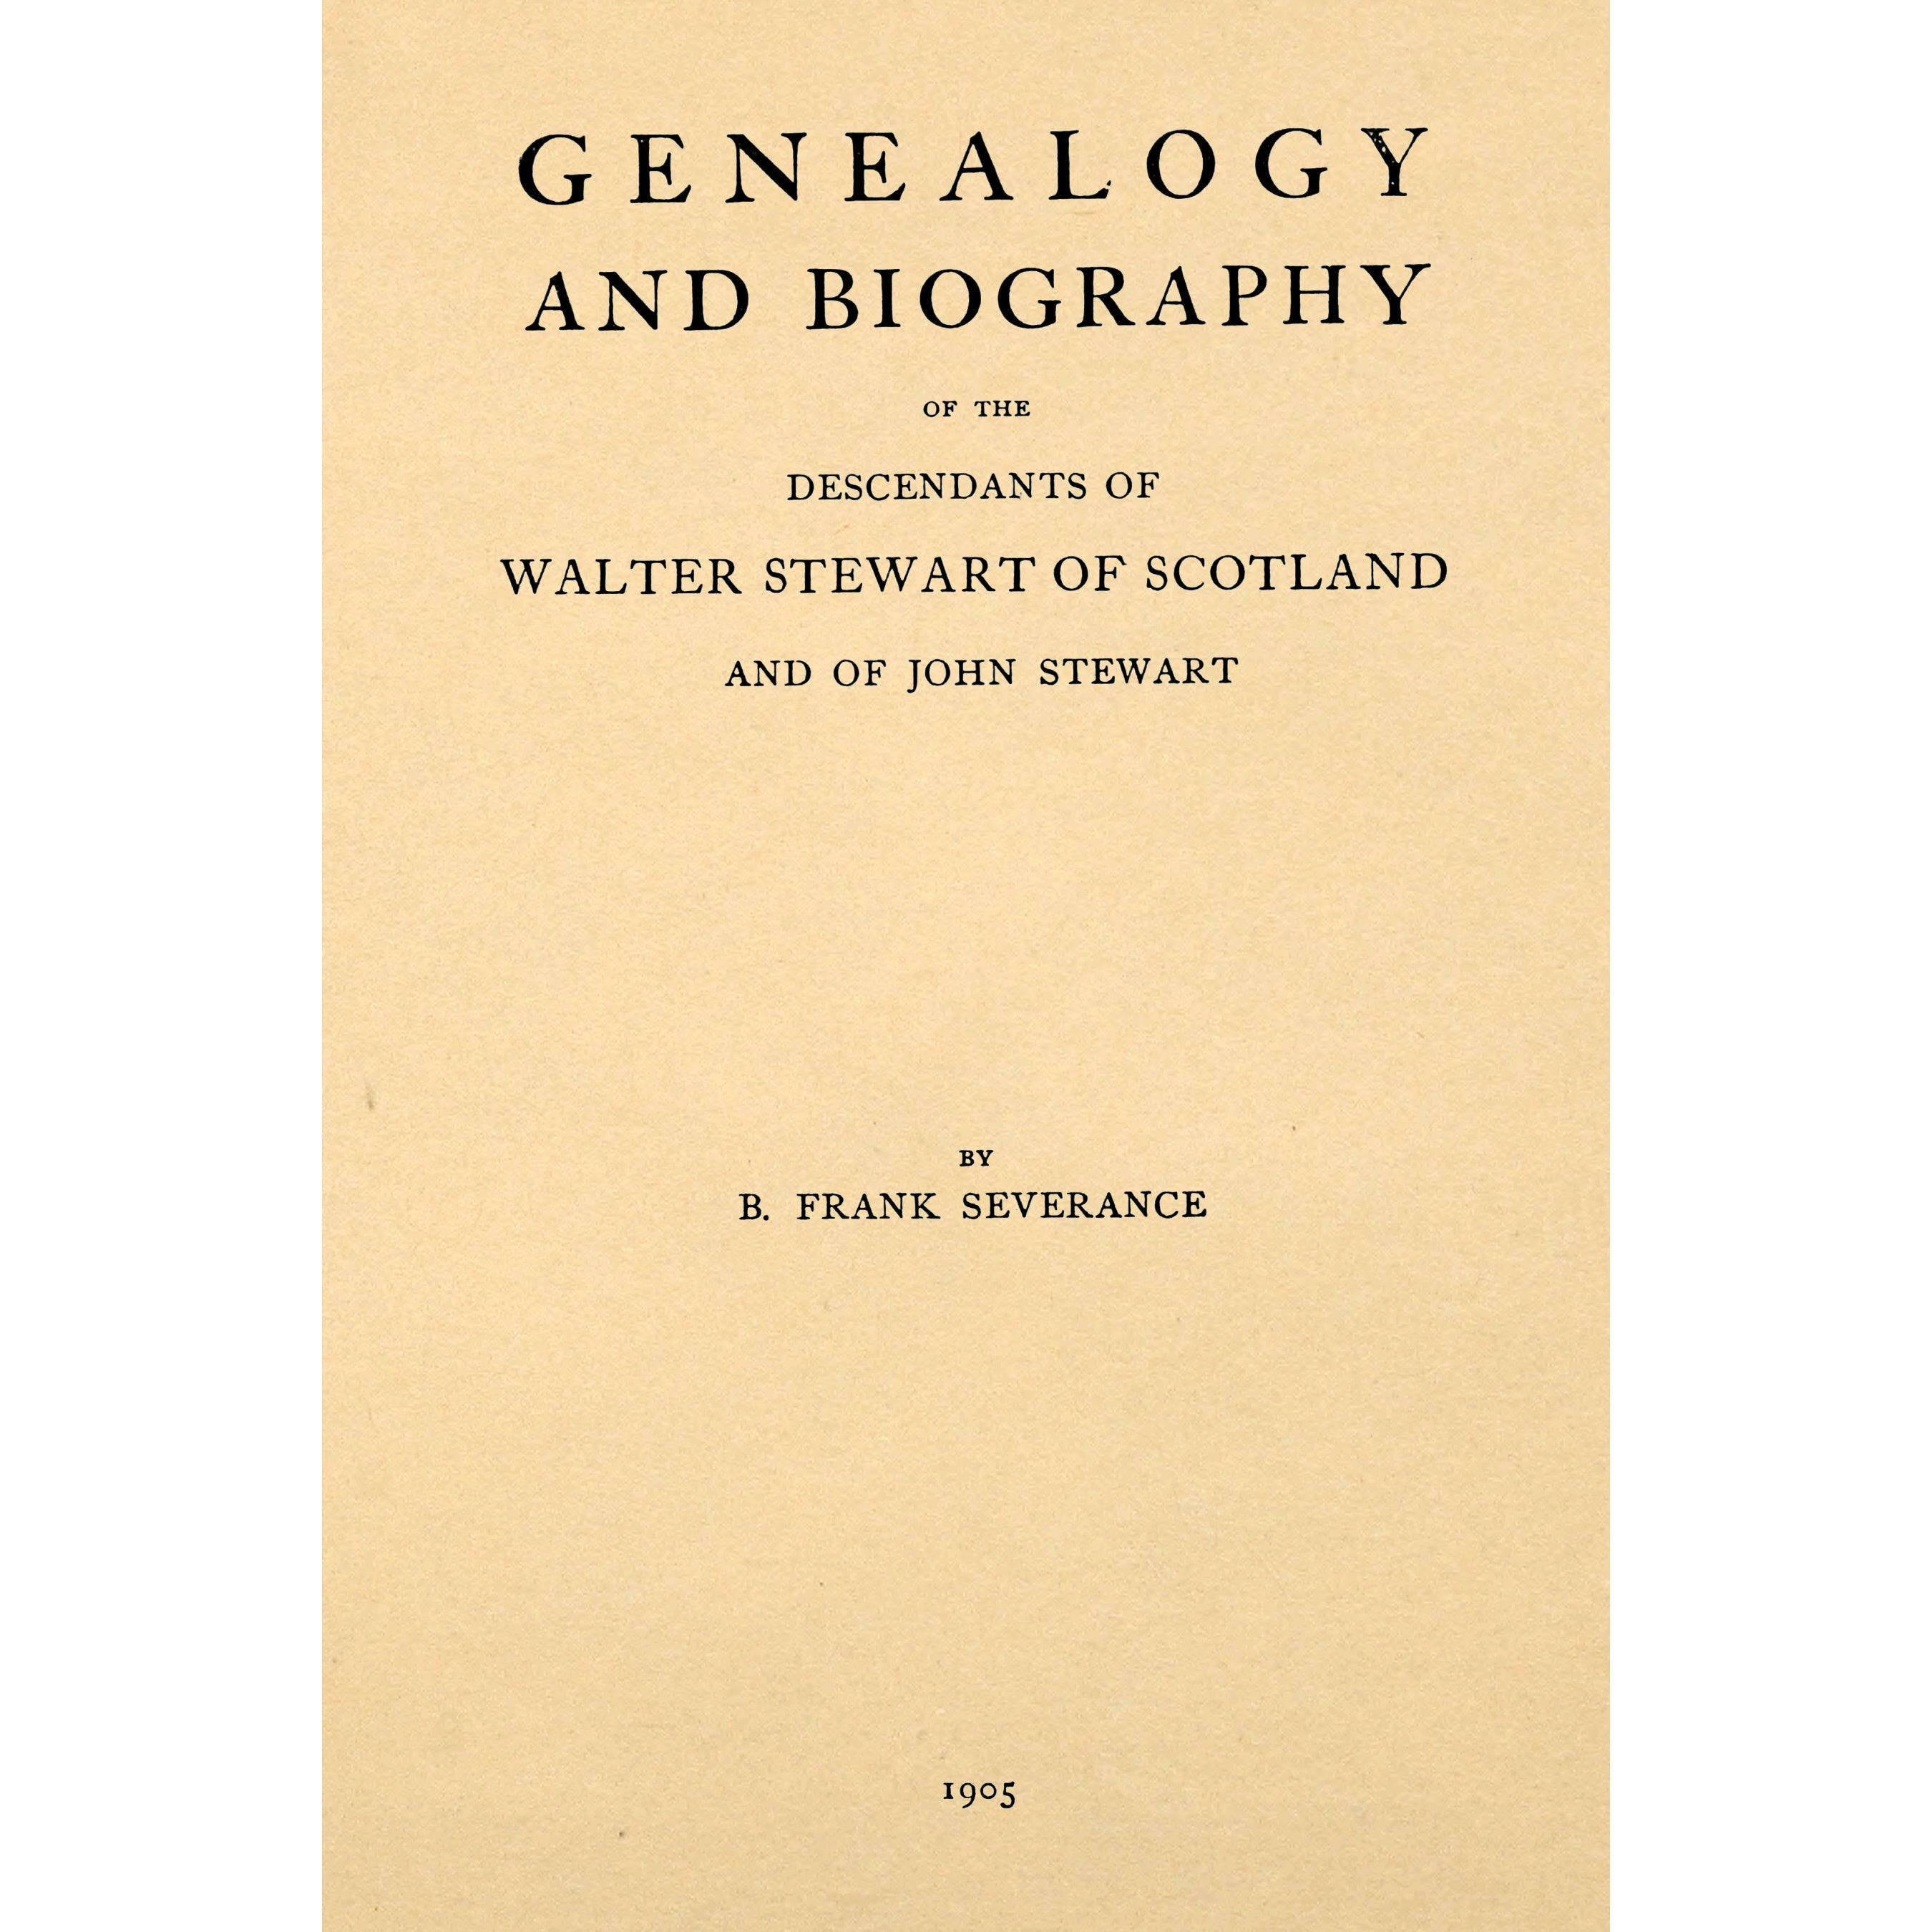 Genealogy and biography of the descendants of Walter Stewart of Scotland : and of John Stewart, who came to America in 1718, and settled in Londonderry, N.H.